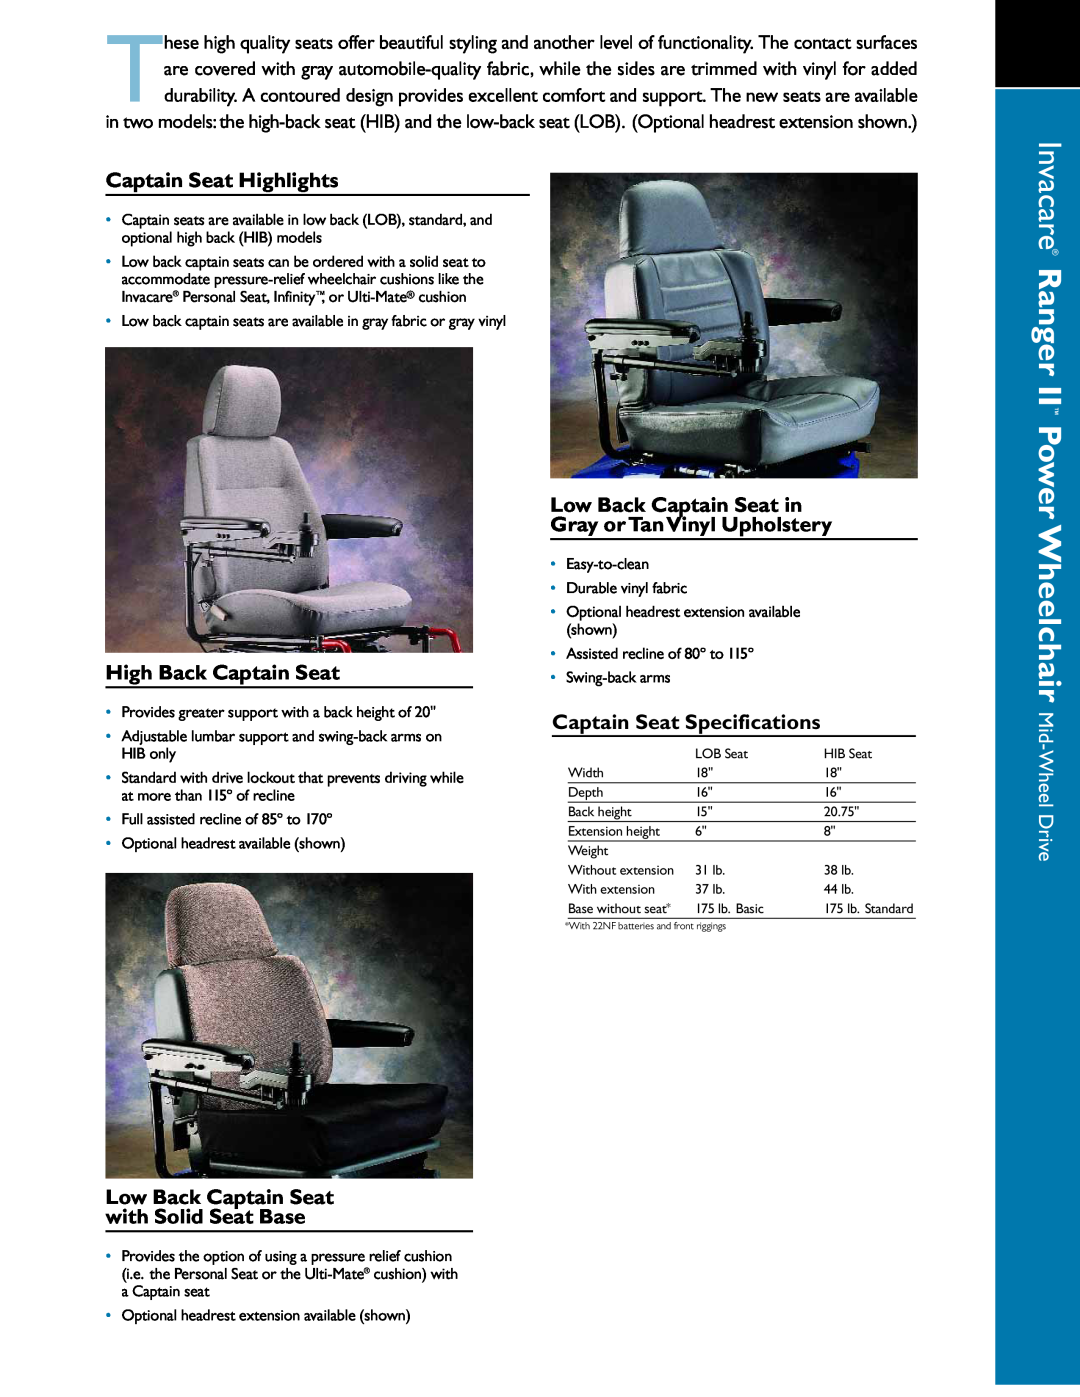 Invacare 22NF specifications Captain Seat Highlights, High Back Captain Seat, Captain Seat Specifications 